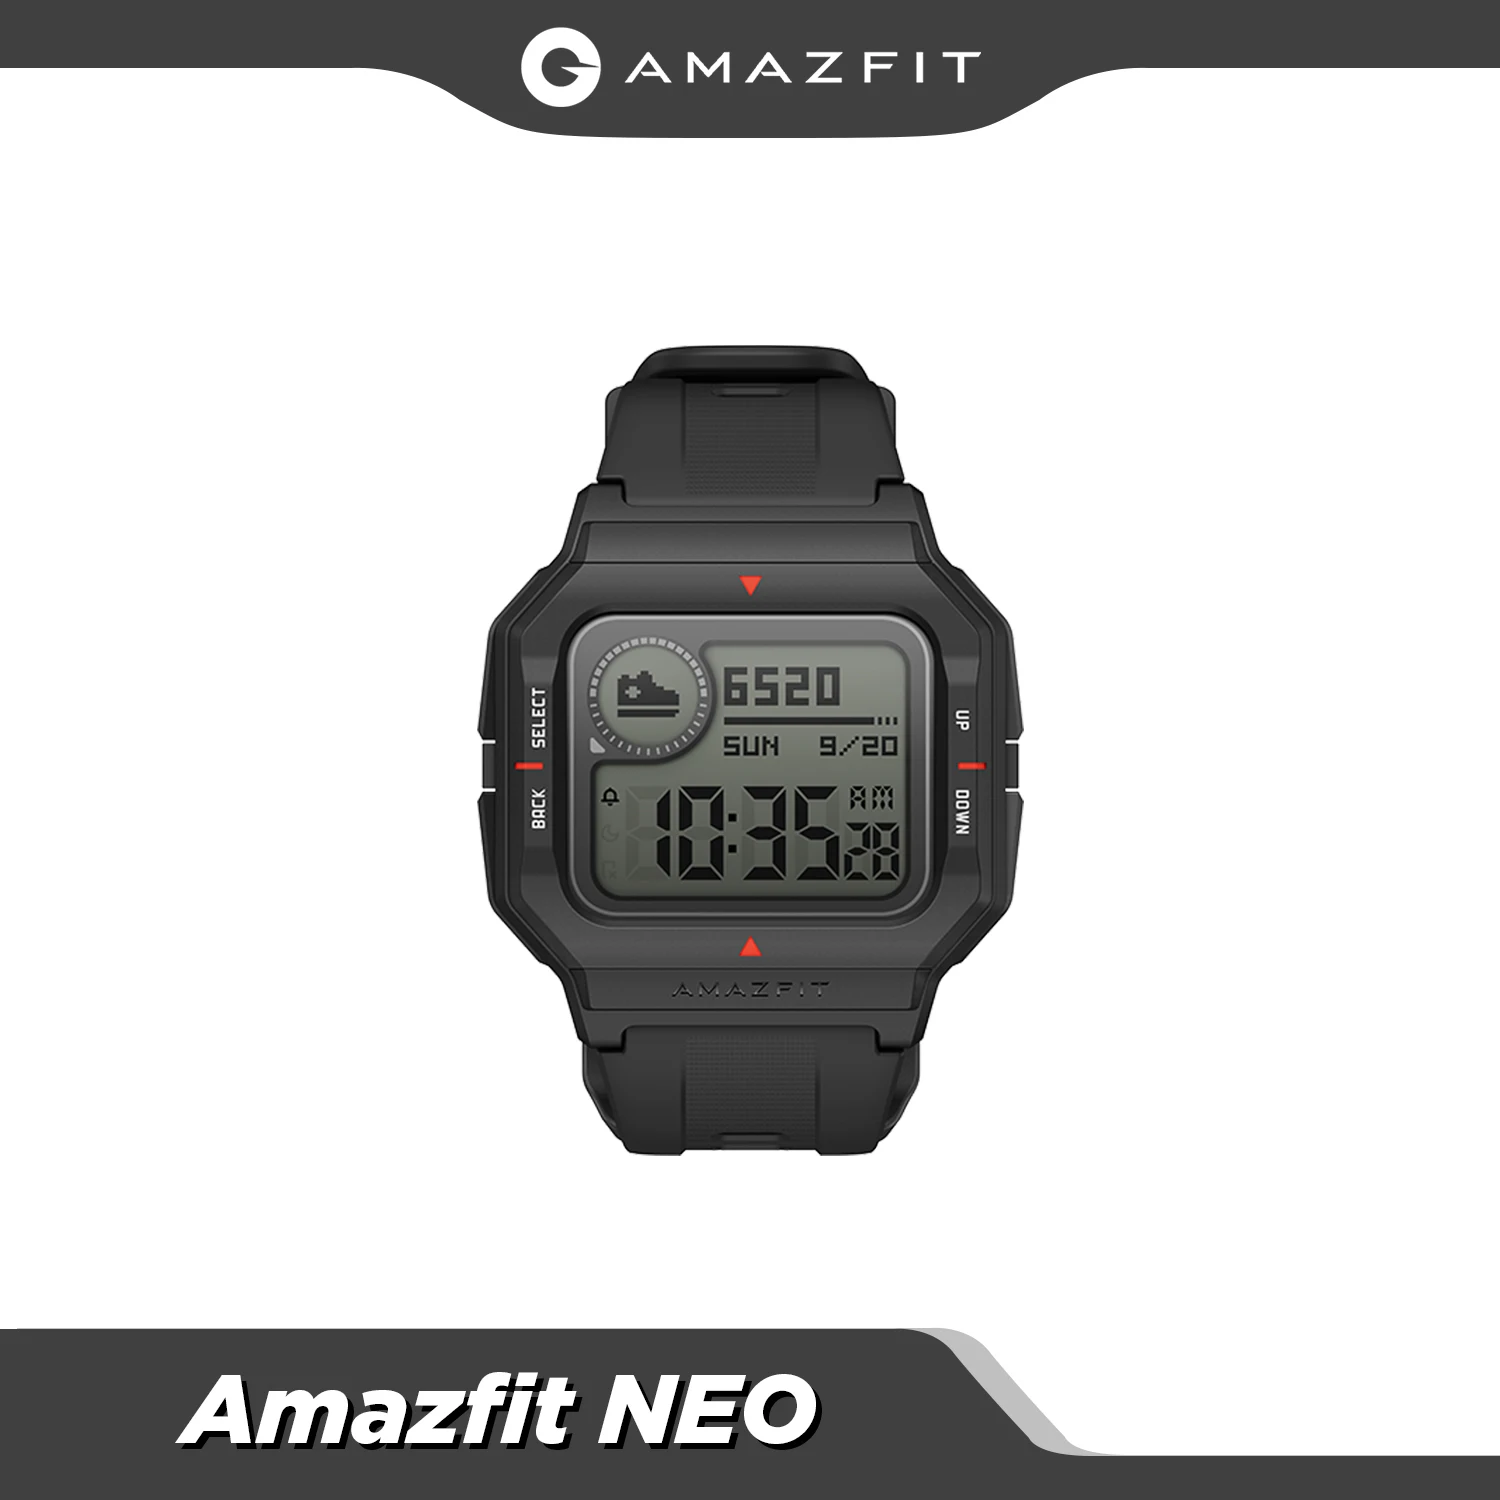 Global Version Amazfit Neo Smartwatch 28 Days Battery Life Retro Design 5ATM 3 Sports Modes Heart Rate Track Sleep Monitor